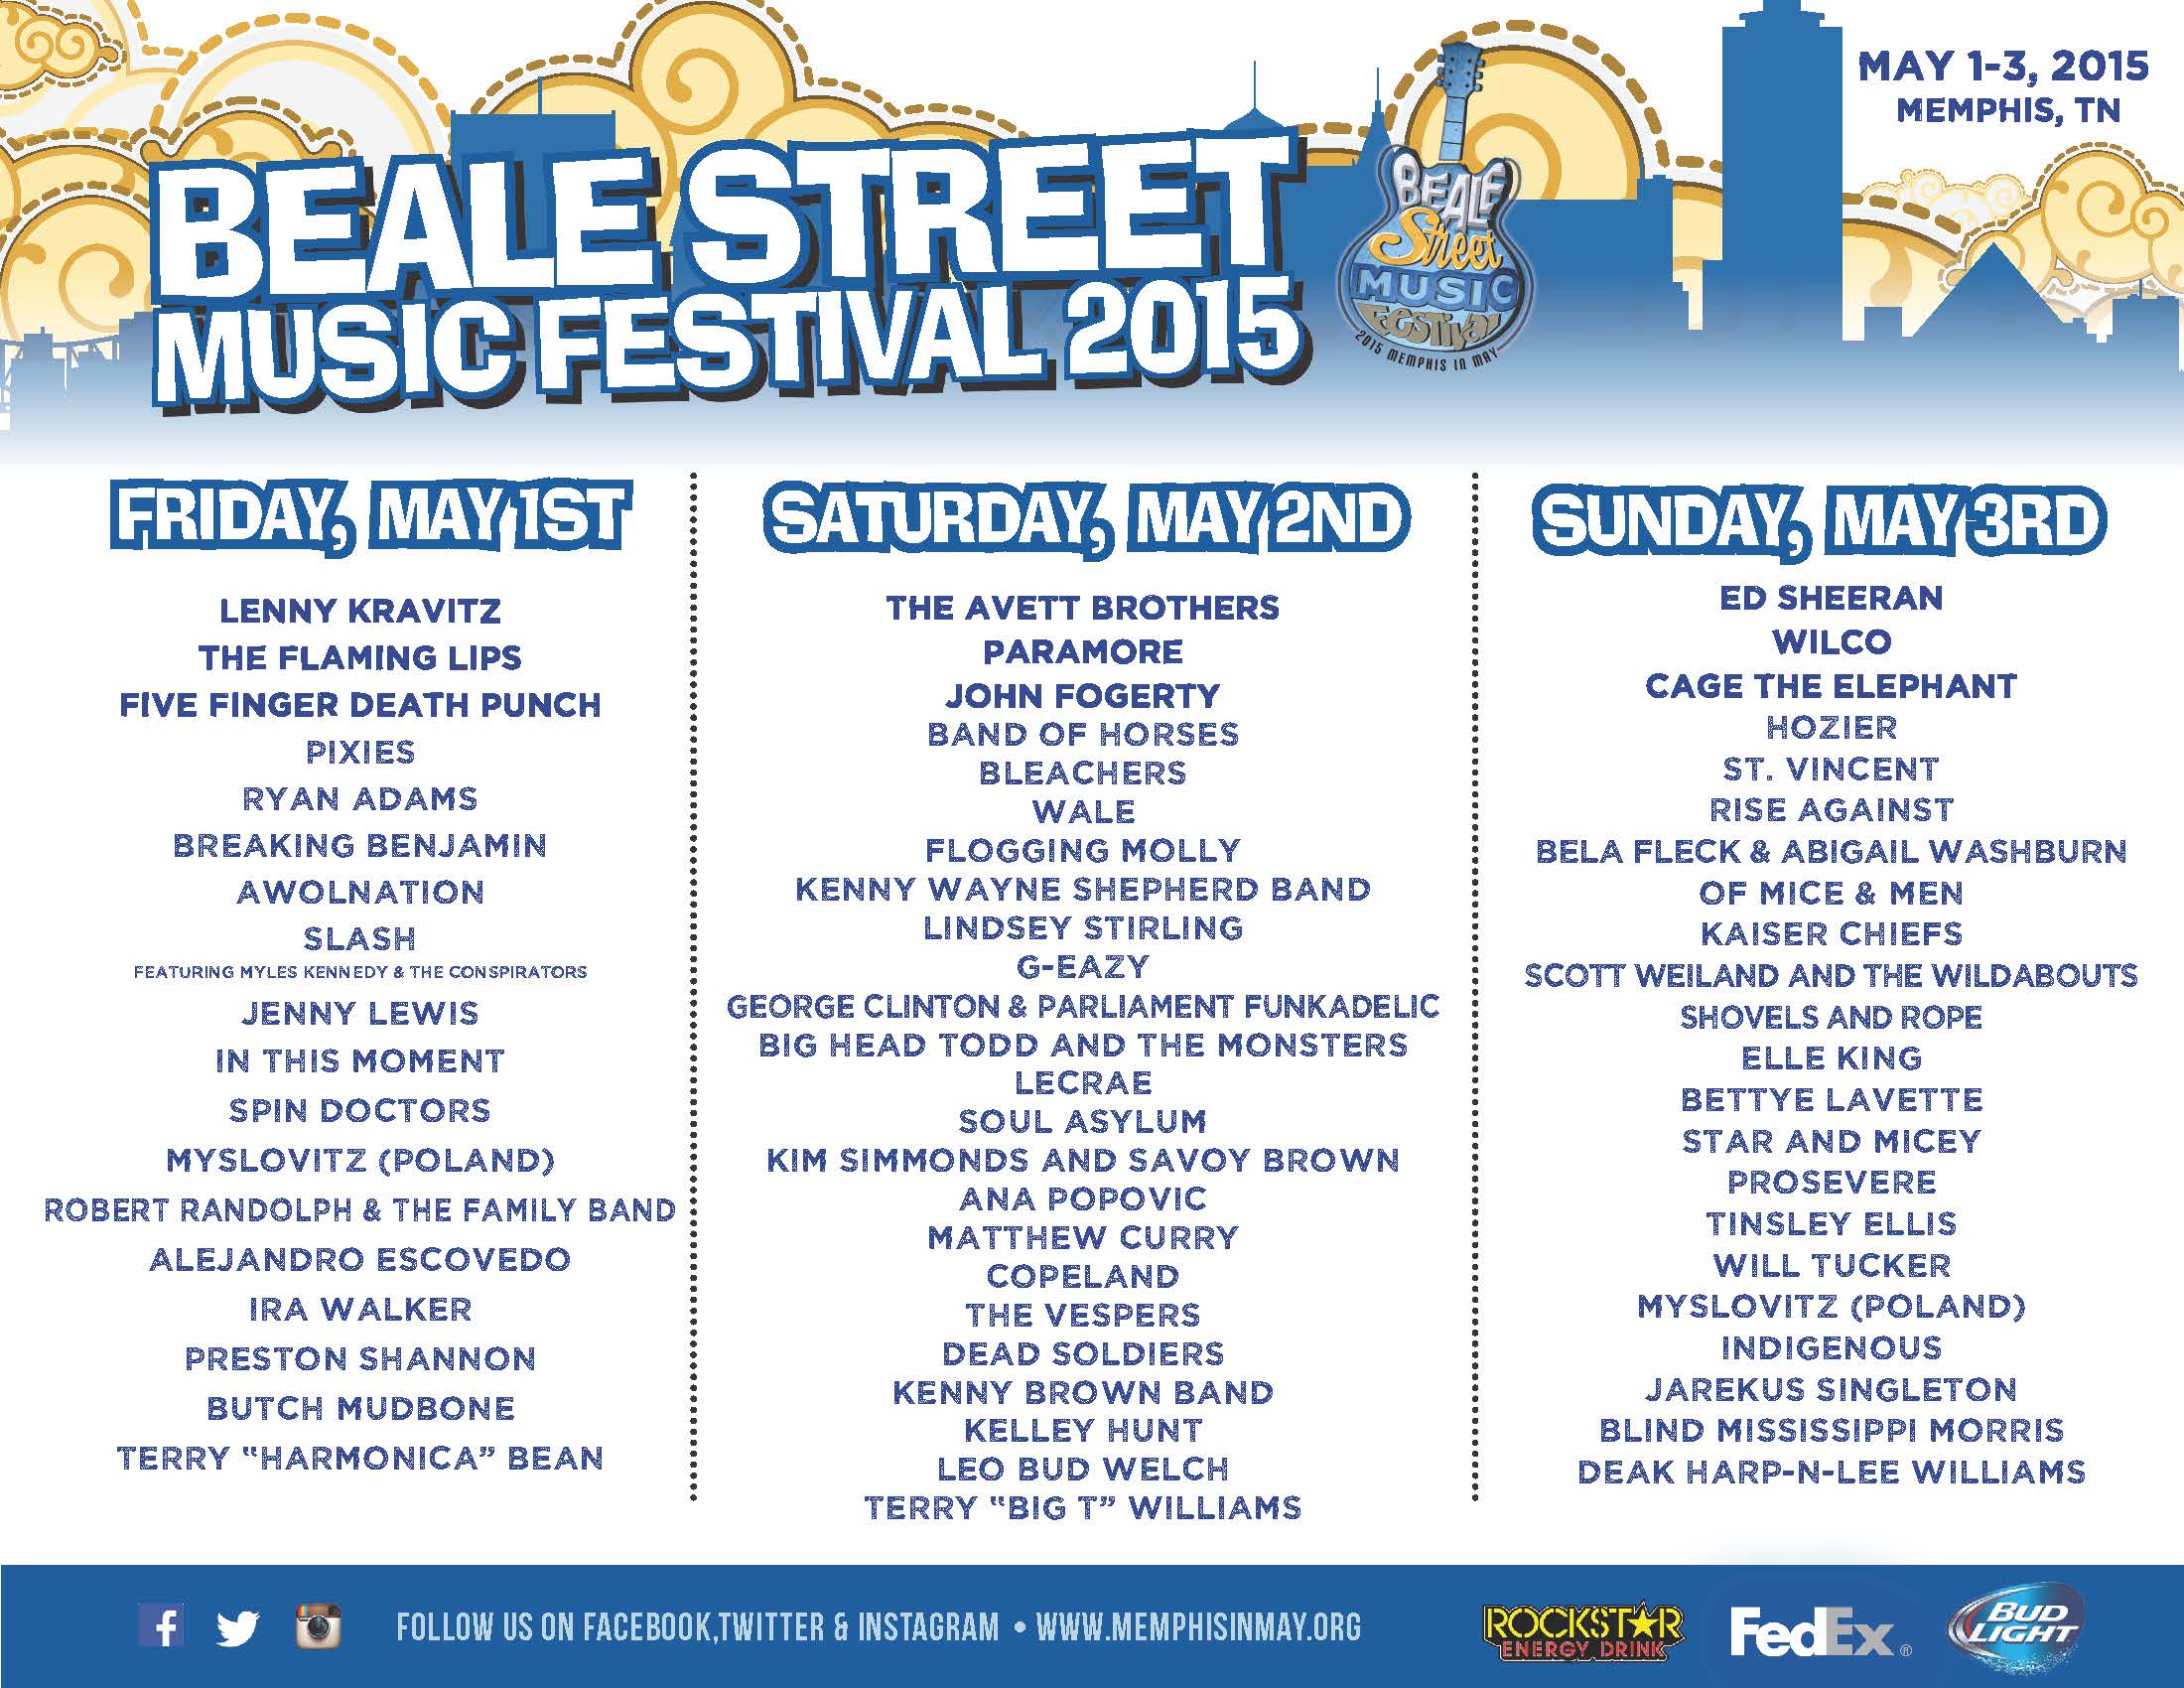 2015 Beale St. Music Festival Line-up by Stages